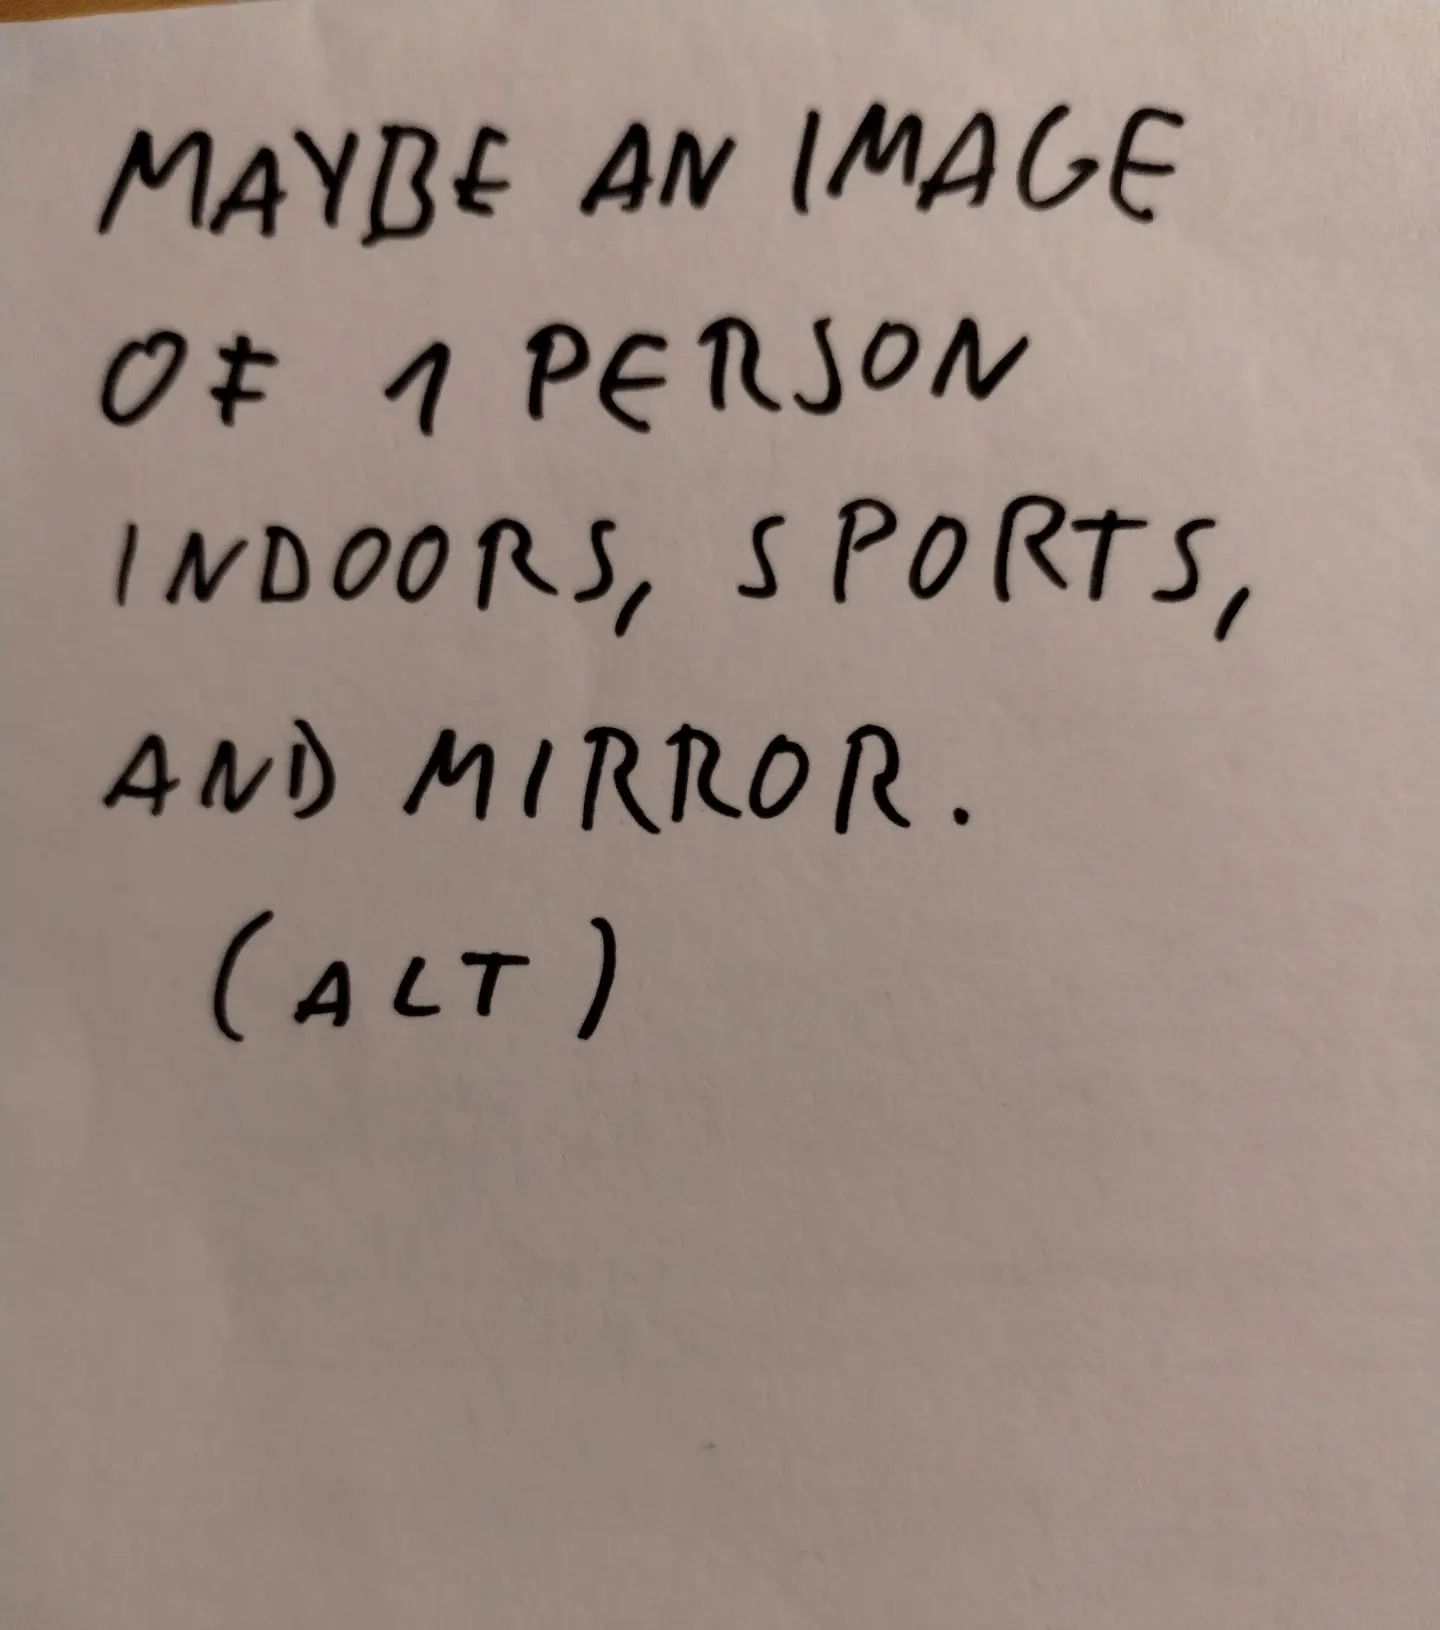 Photo of handwritten text on paper:	Maybe an image of 1 person, indoors, sports and mirror.	(ALT)